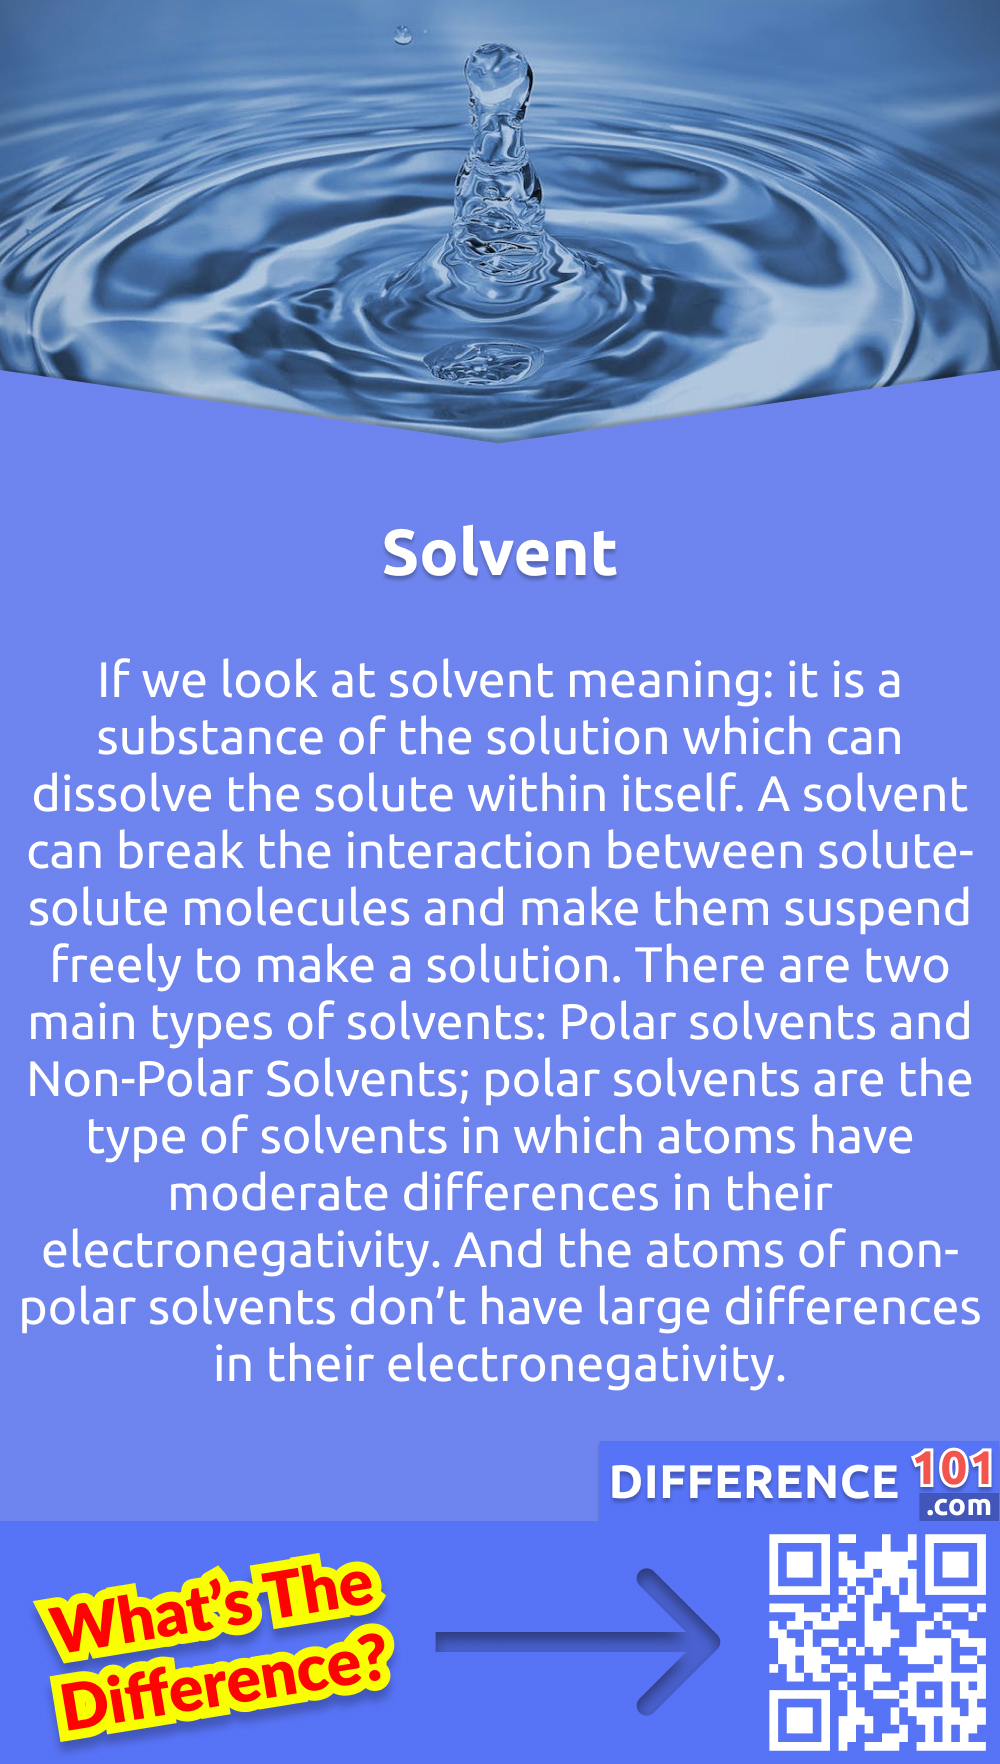 What Is Solvent? If we look at solvent meaning: it is a substance of the solution which can dissolve the solute within itself. A solvent can break the interaction between solute-solute molecules and make them suspend freely to make a solution. There are two main types of solvents: Polar solvents and Non-Polar Solvents; polar solvents are the type of solvents in which atoms have moderate differences in their electronegativity. And the atoms of non-polar solvents don’t have large differences in their electronegativity. A solvent is mostly in a liquid state, but it can be solid and gaseous as well; for example, brass is a solid solution that contains a solid solvent. The solubility of a solvent depends upon the properties of that solvent, including polarity. There are various examples of solvents in our daily life; for example, water, which can dissolve various solutes in itself, is a solvent.